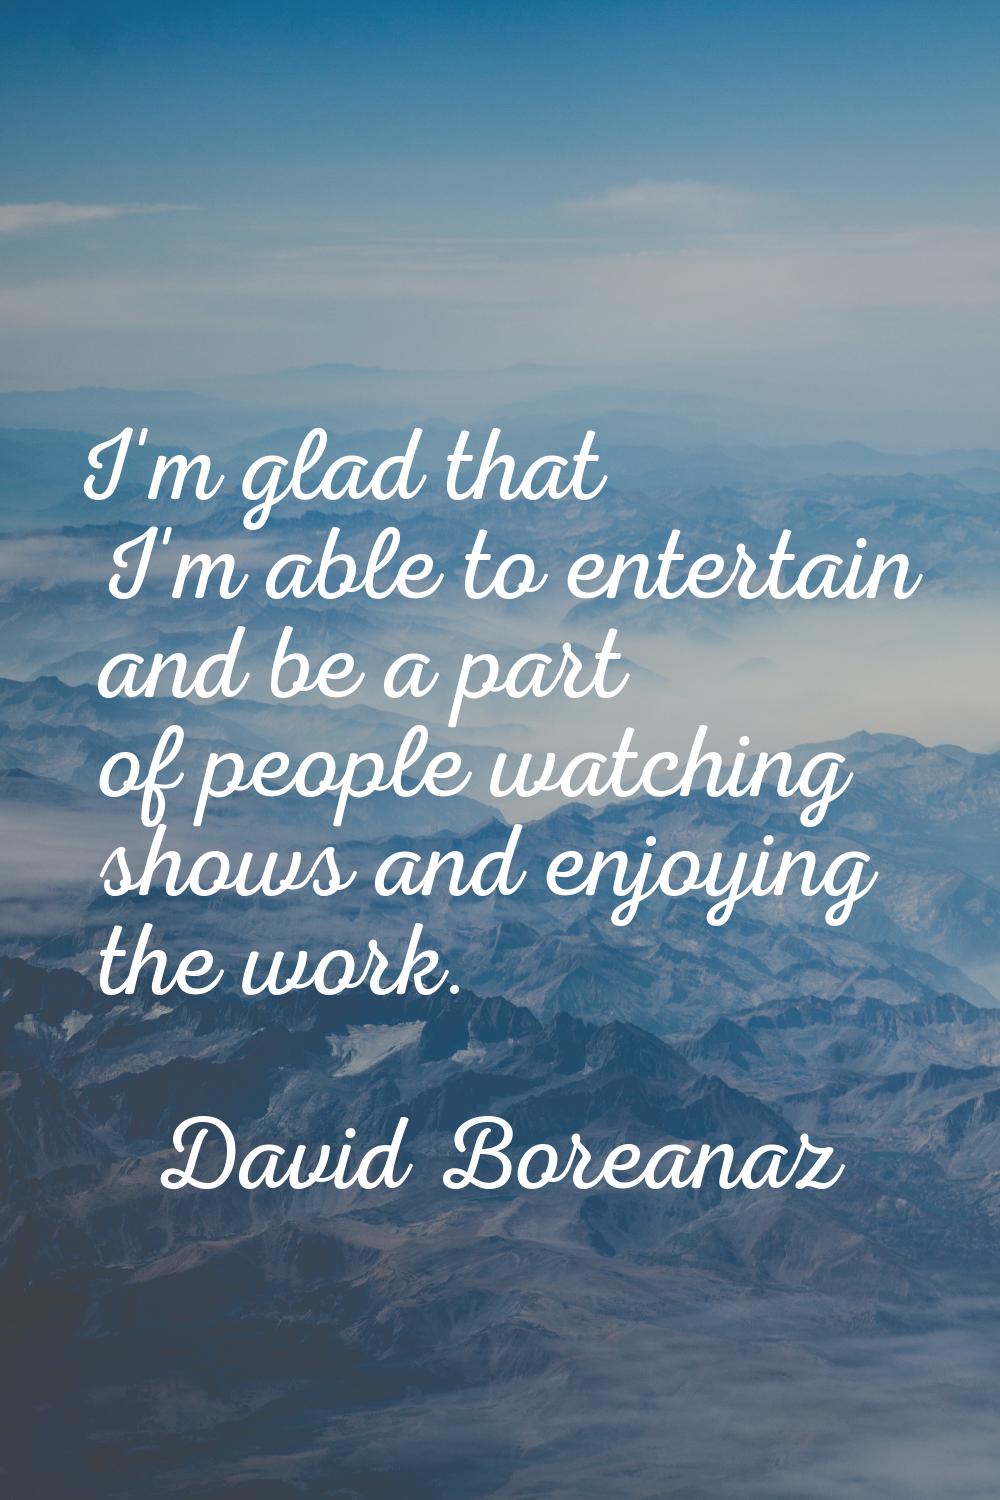 I'm glad that I'm able to entertain and be a part of people watching shows and enjoying the work.